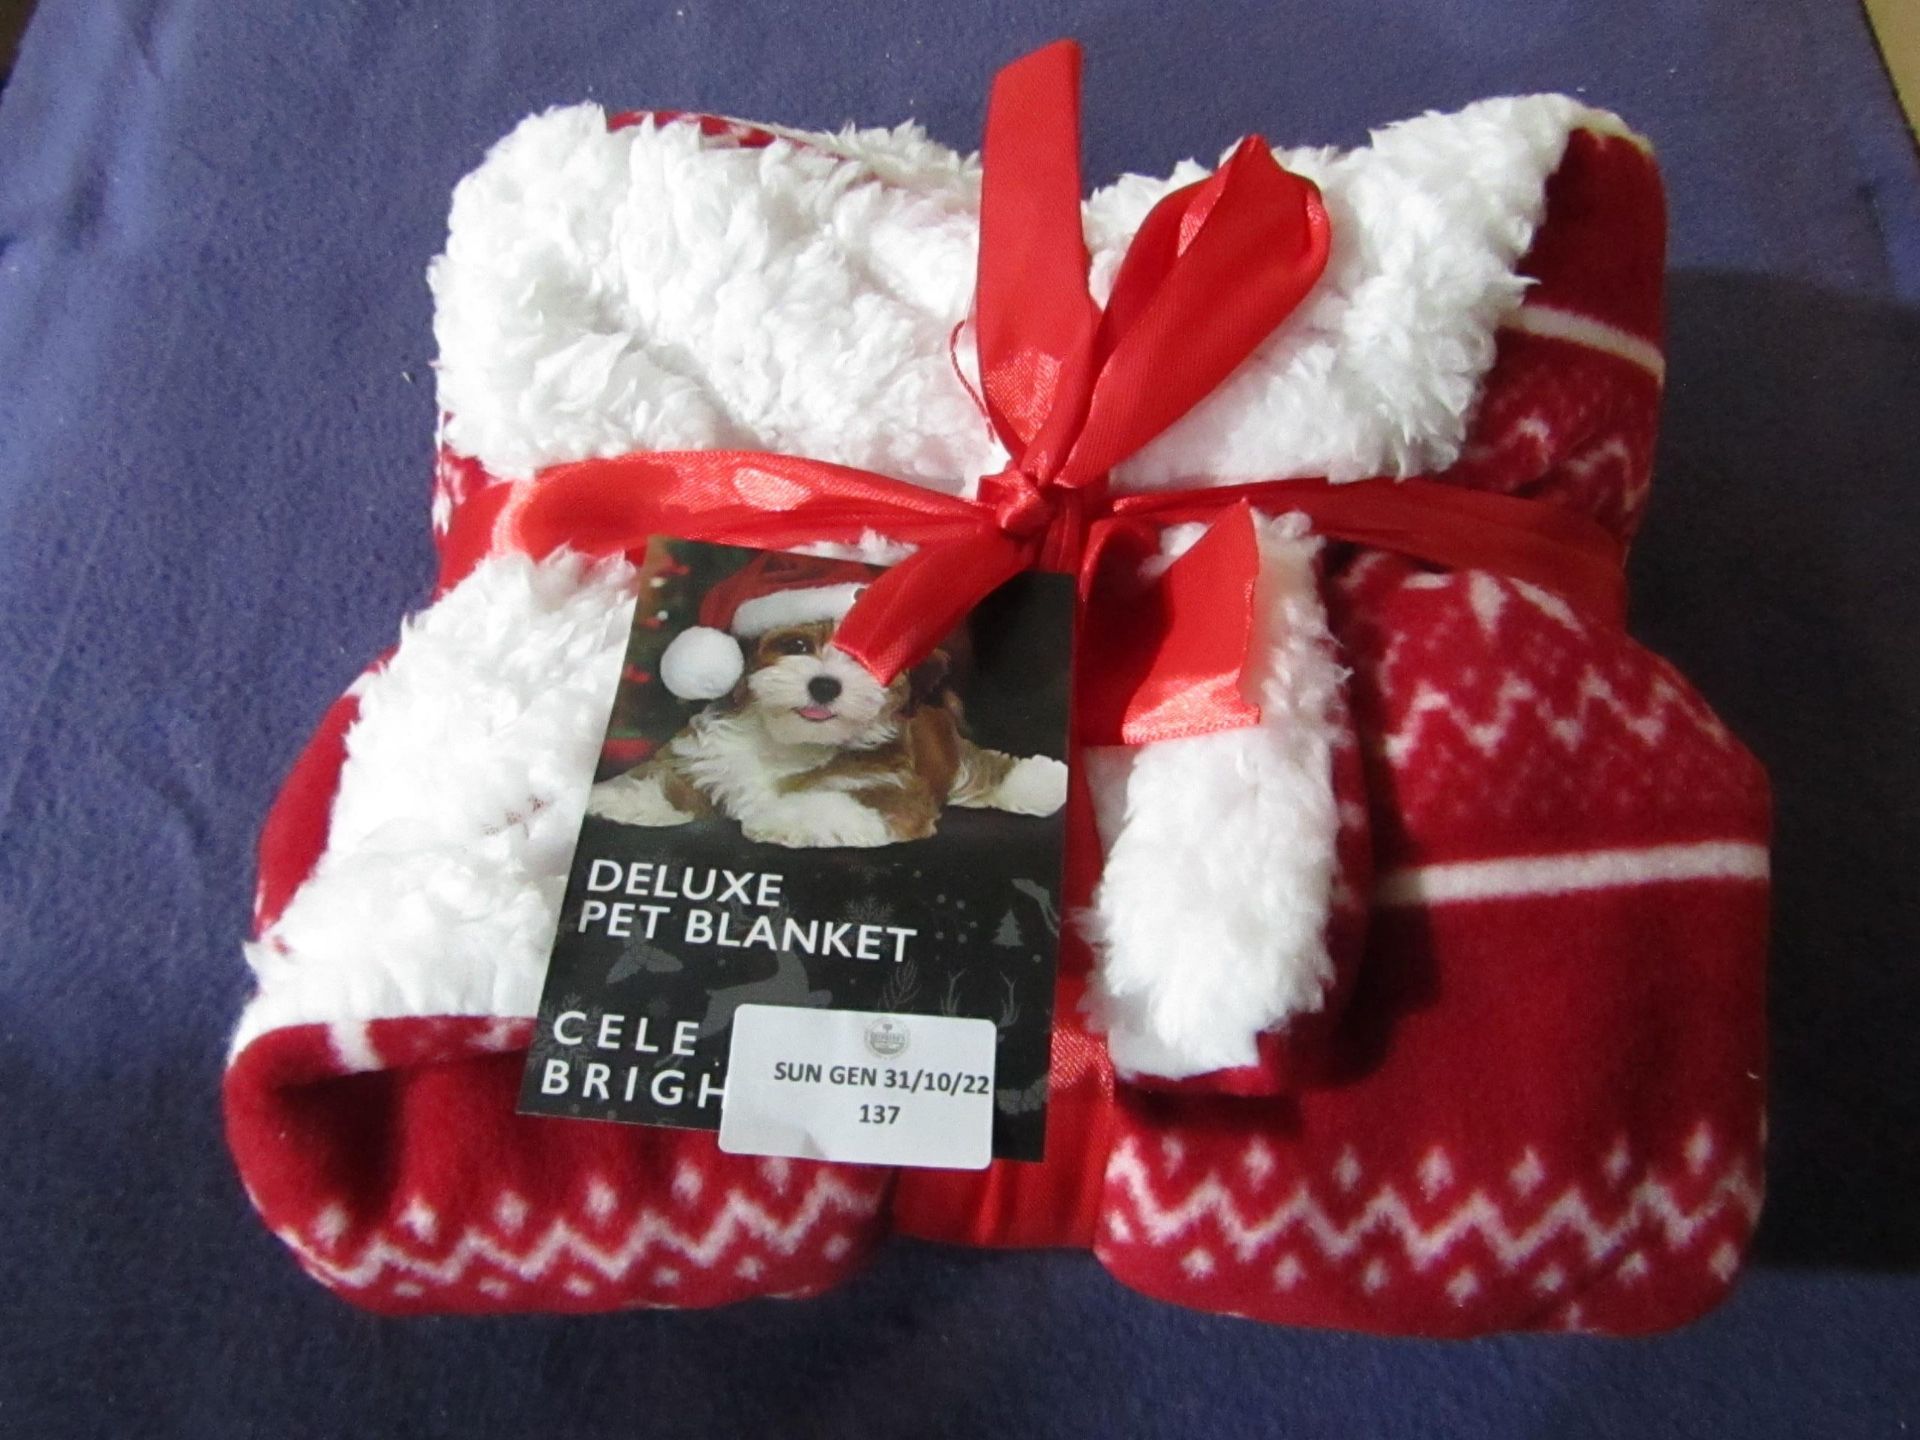 Celebright - Deluxe Christmas Pet Blanket - Good Condition, No Packaging.